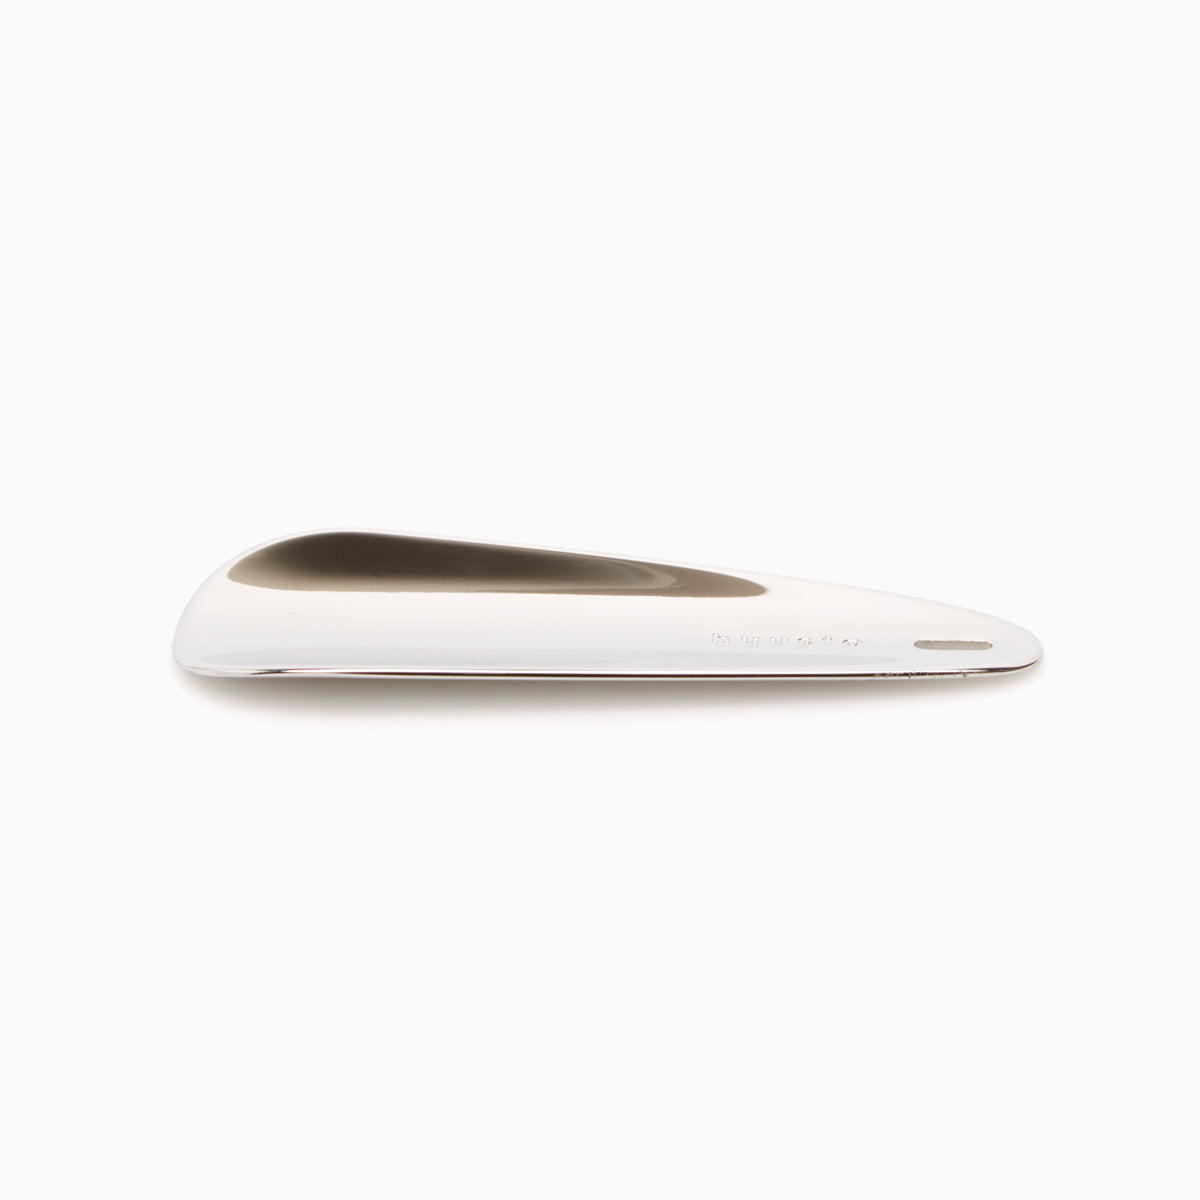 Hyusto silver shoe horn side view